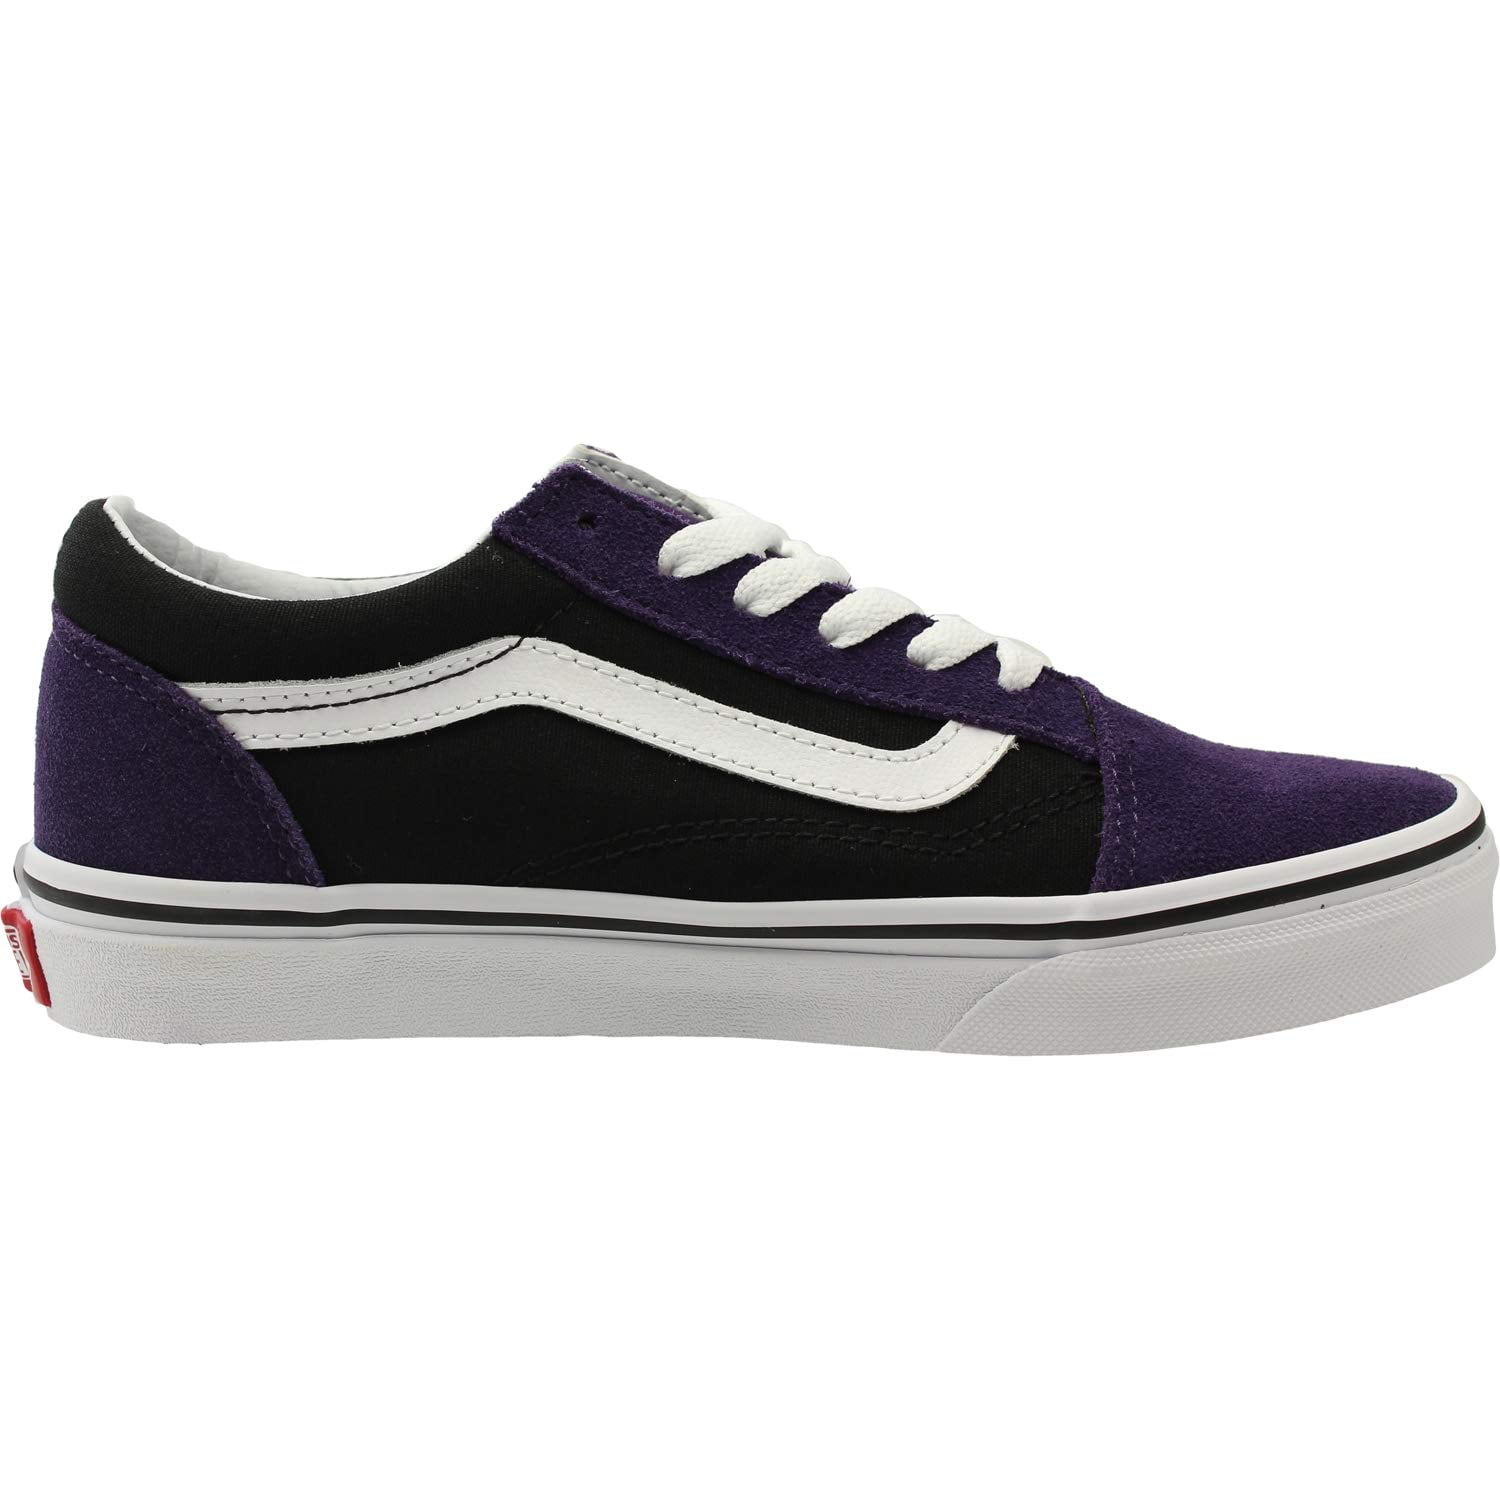 vans youth size 2